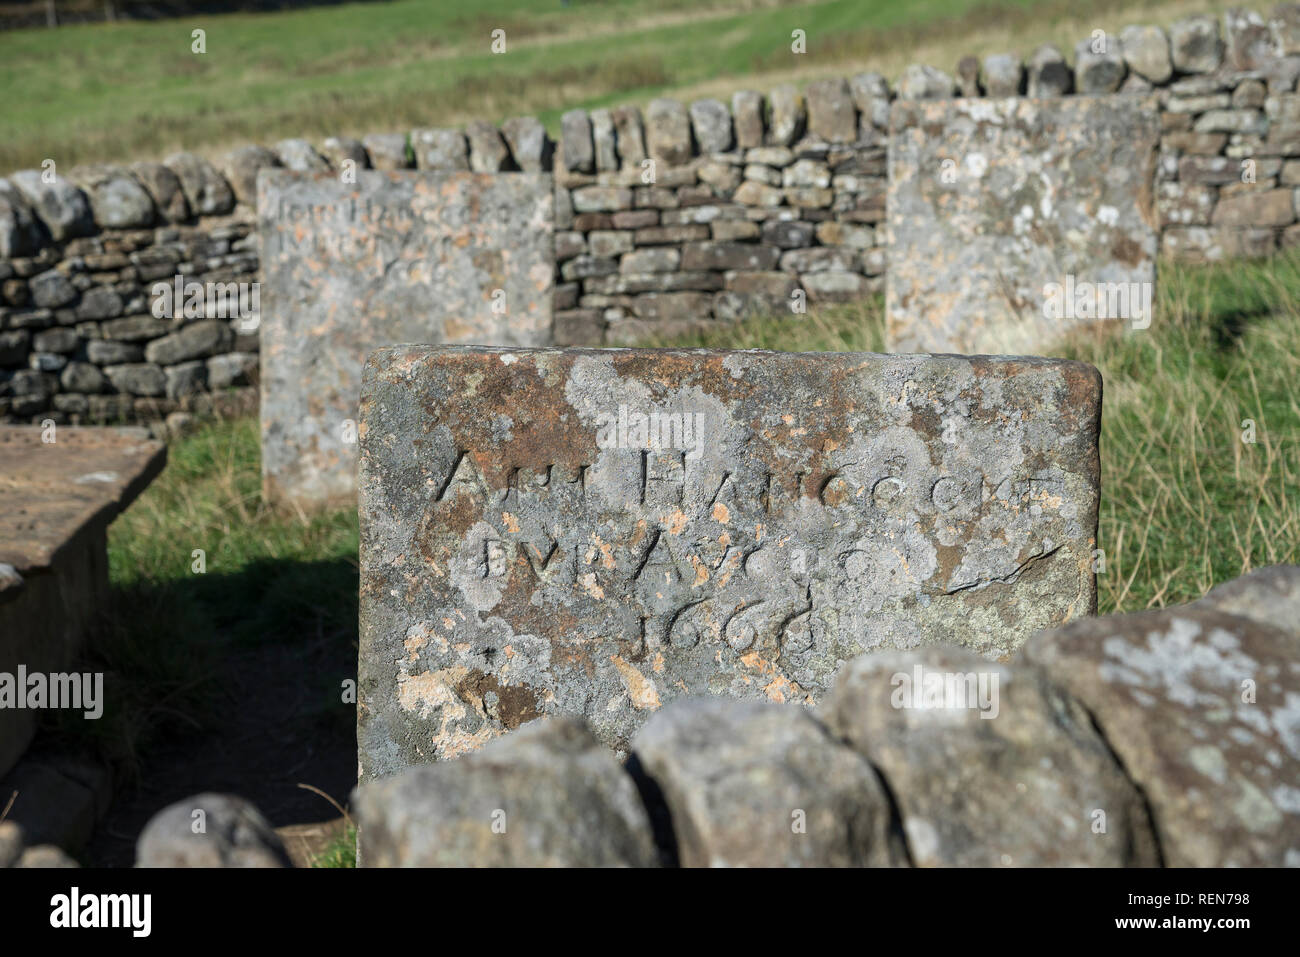 Close up of gravestone in the Riley Graves near Eyam in the Peak District, Derbyshire, England. Victims of the 17th century outbreak of plague. Stock Photo